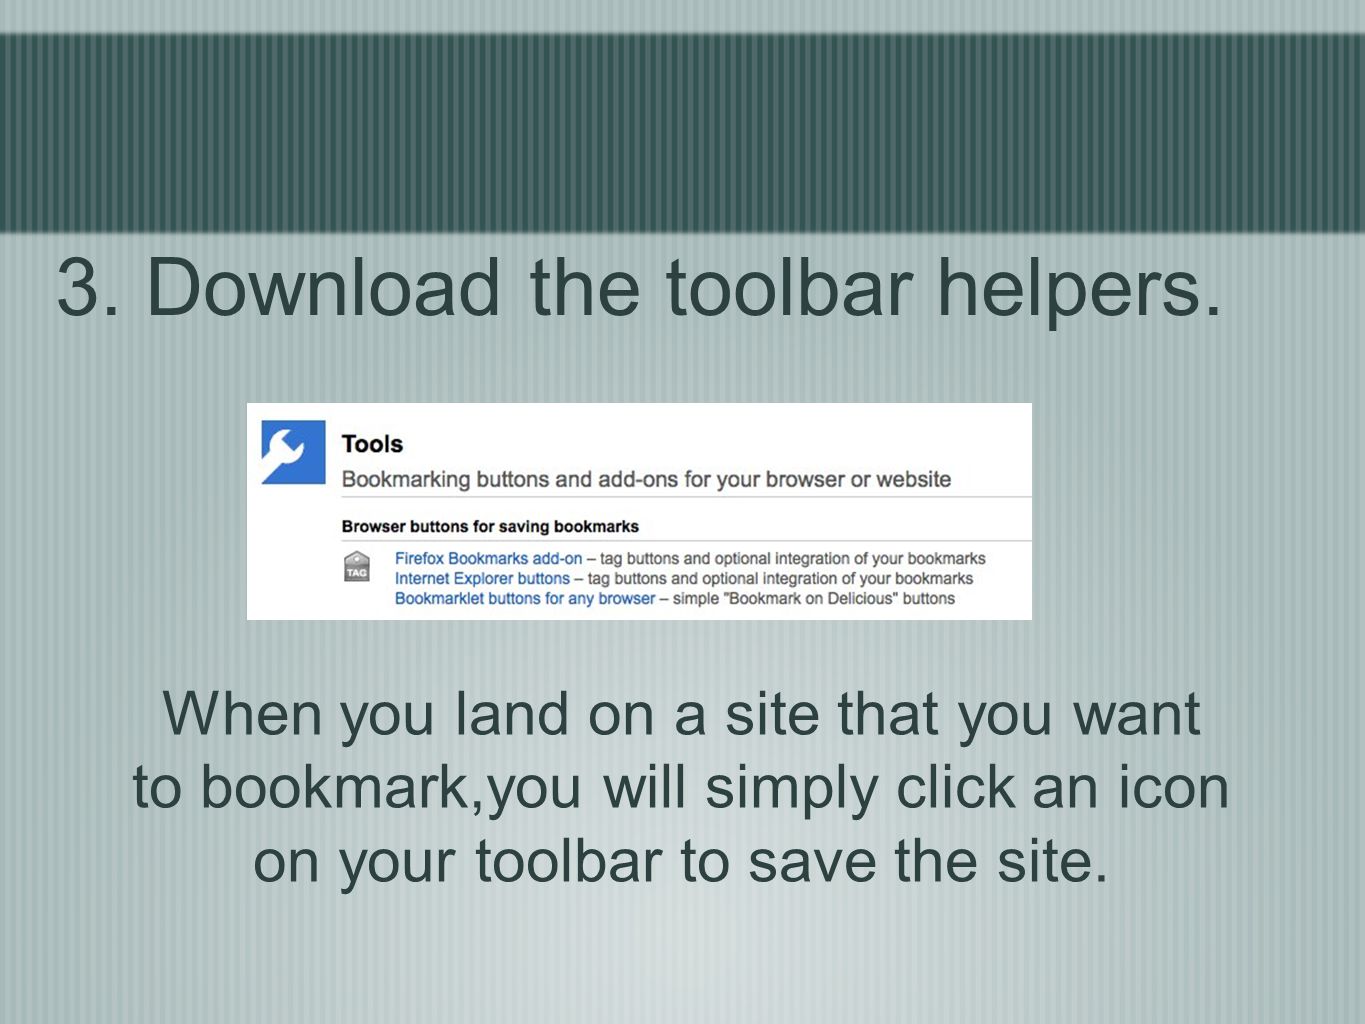 3. Download the toolbar helpers.